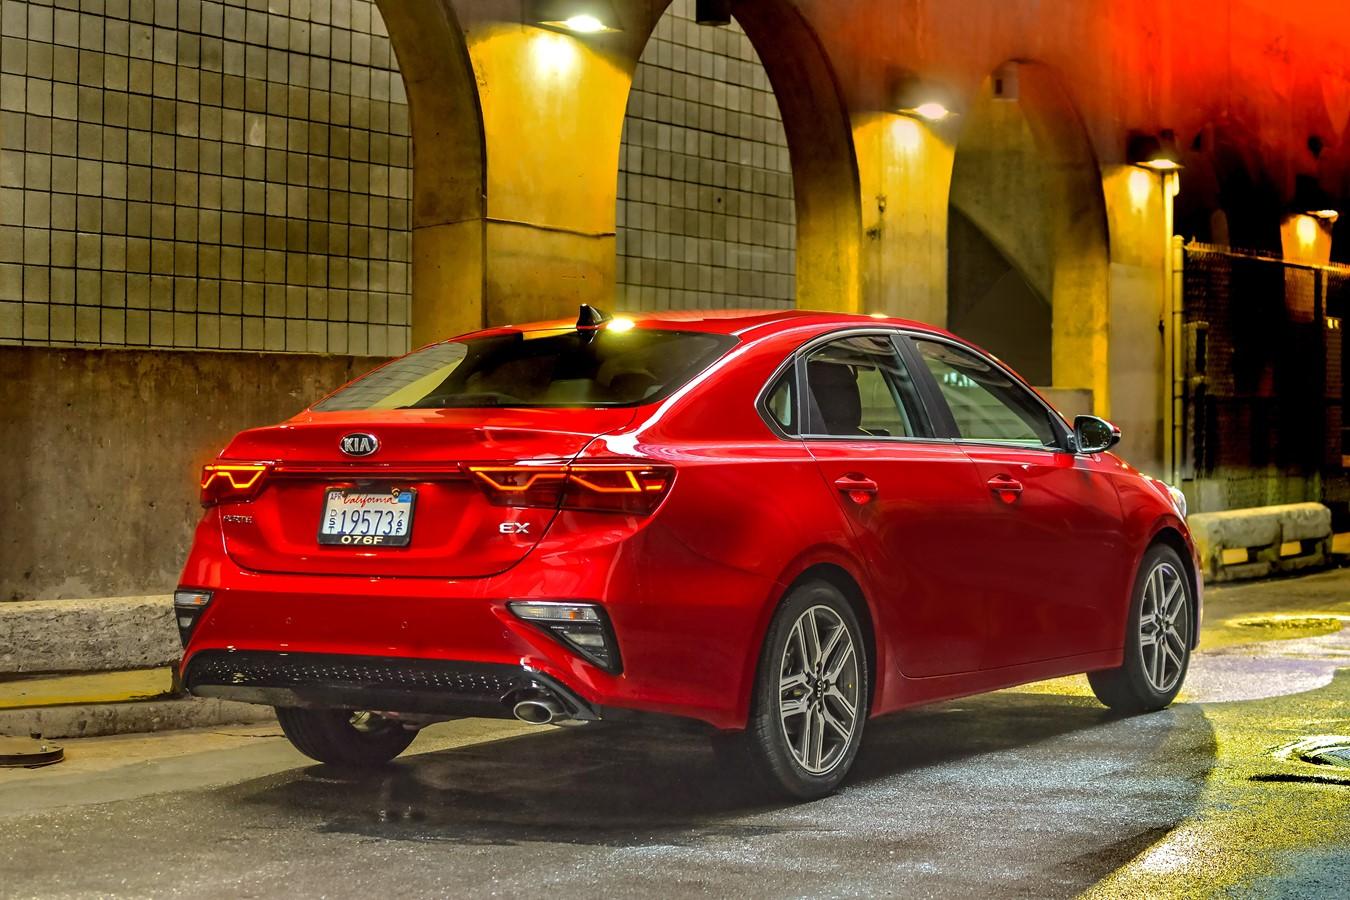 A red 2019 Kia Forte on display.